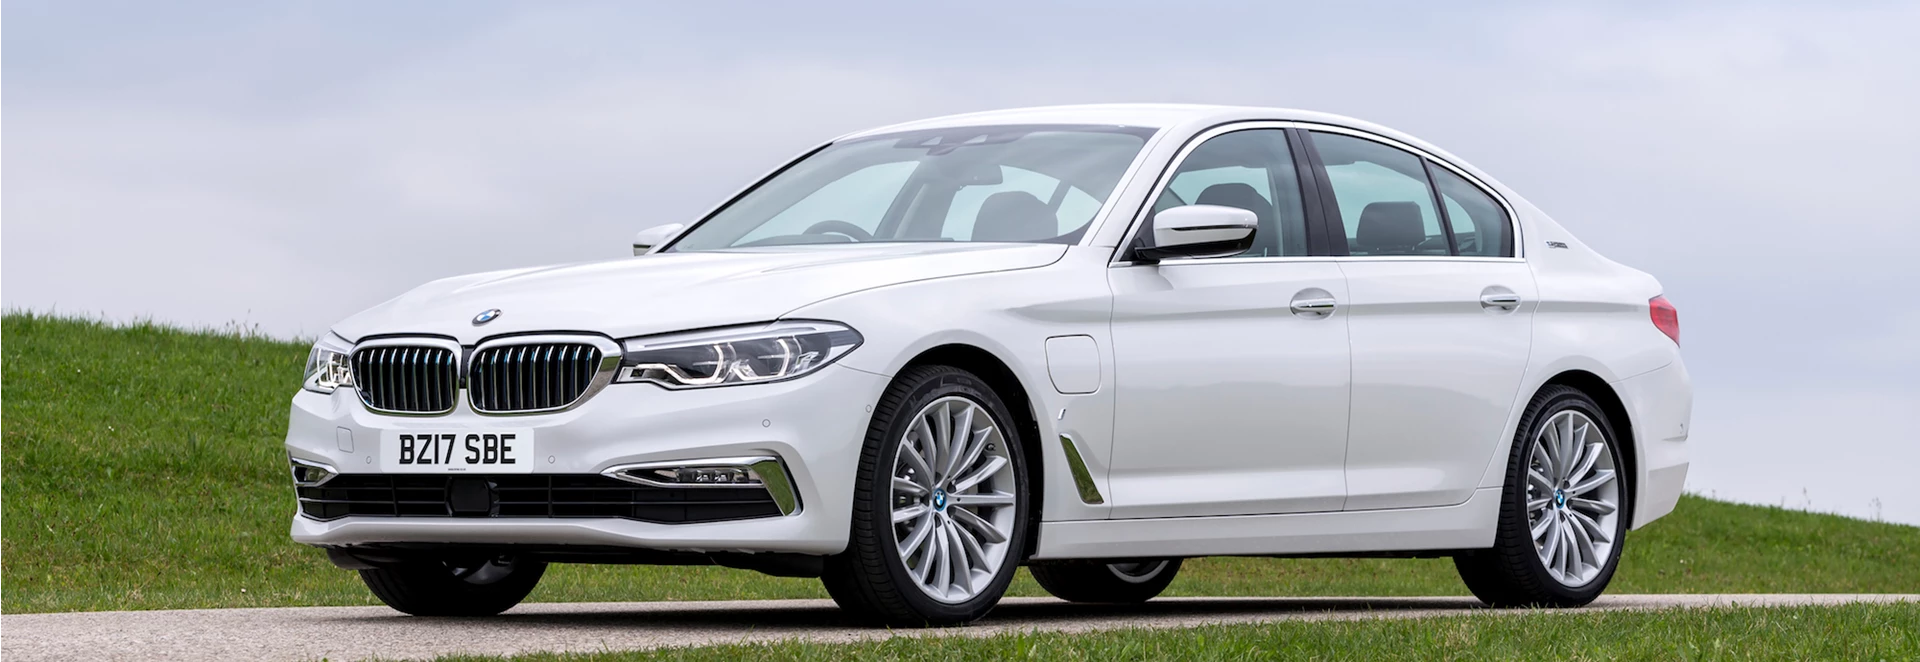 2018 BMW 530e iPerformance Review